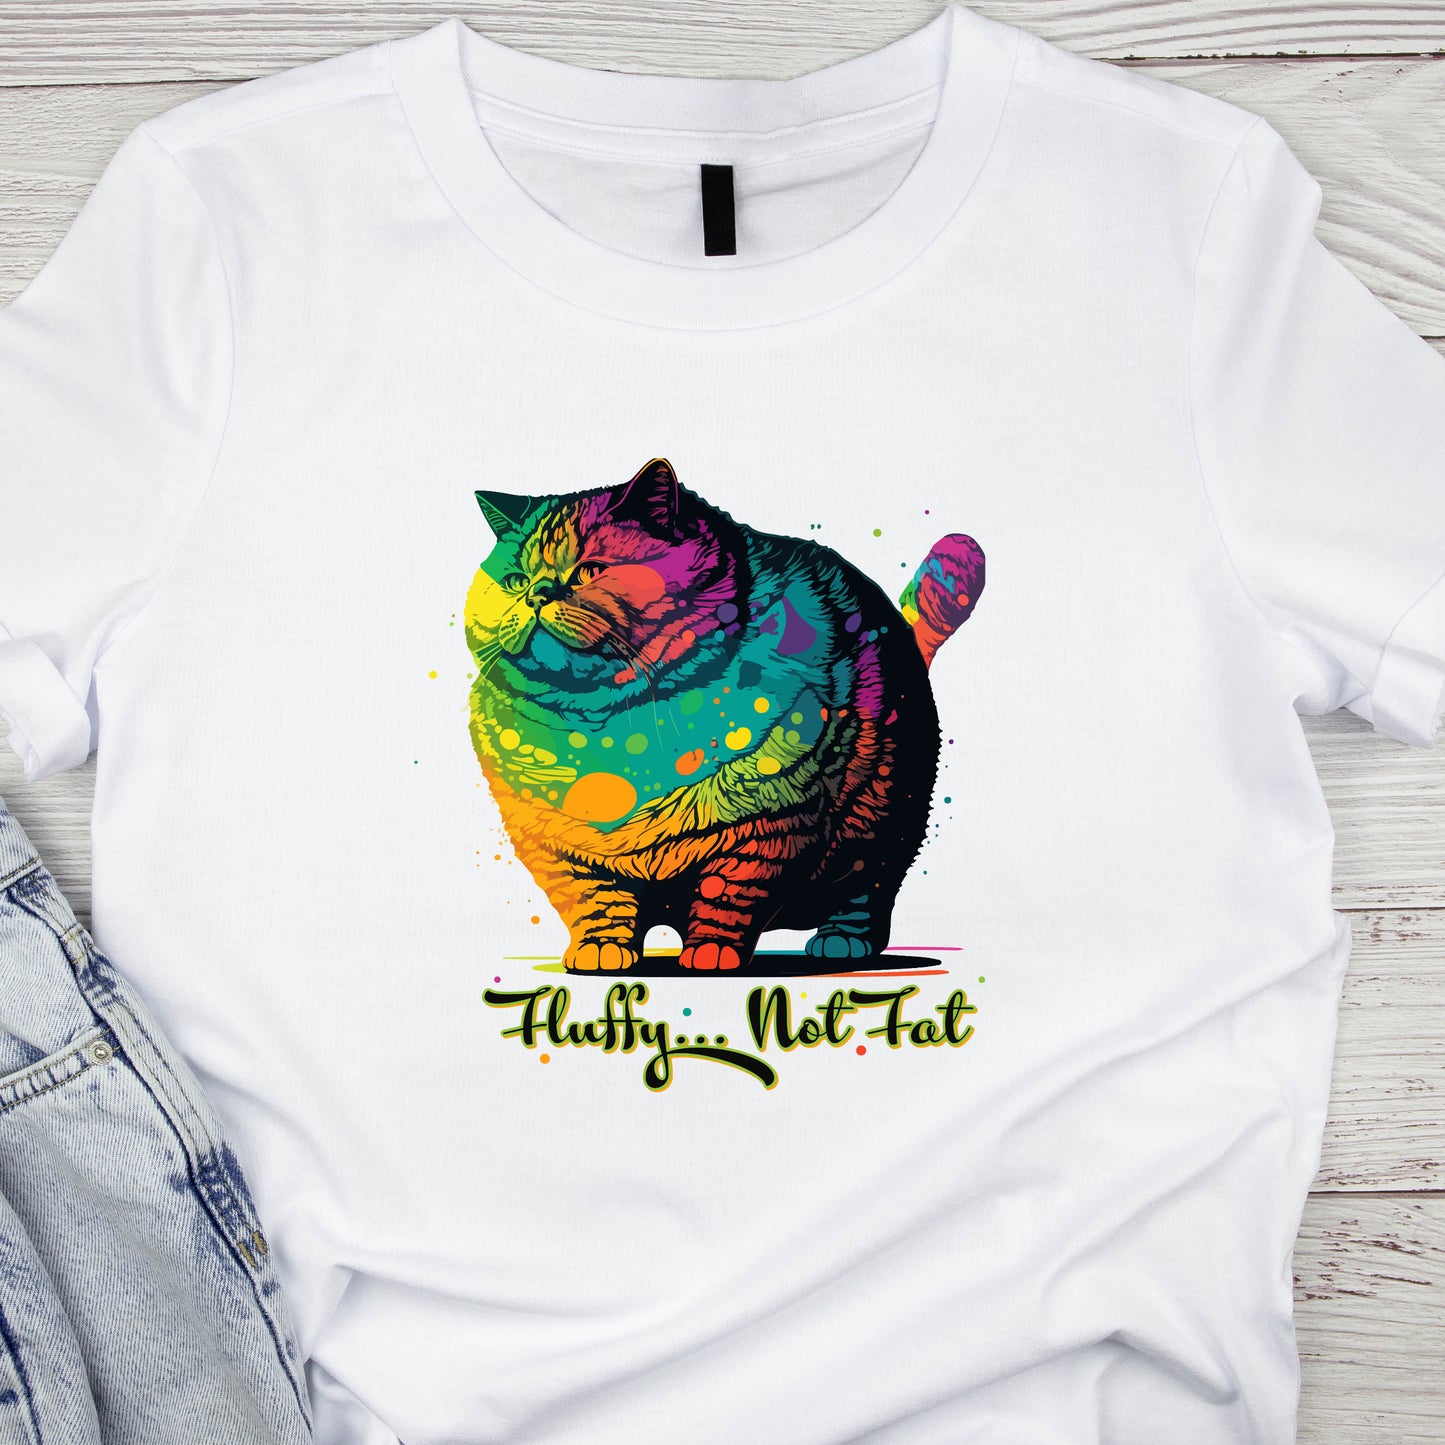 Fat Cat T-Shirt For Chonk T Shirt For Chonky Cat TShirt With Colorful Cat Shirt For Cat Lovers TShirt With Fluffy Cat Shirt For Not Fat TShirt For Cat Lover Gift